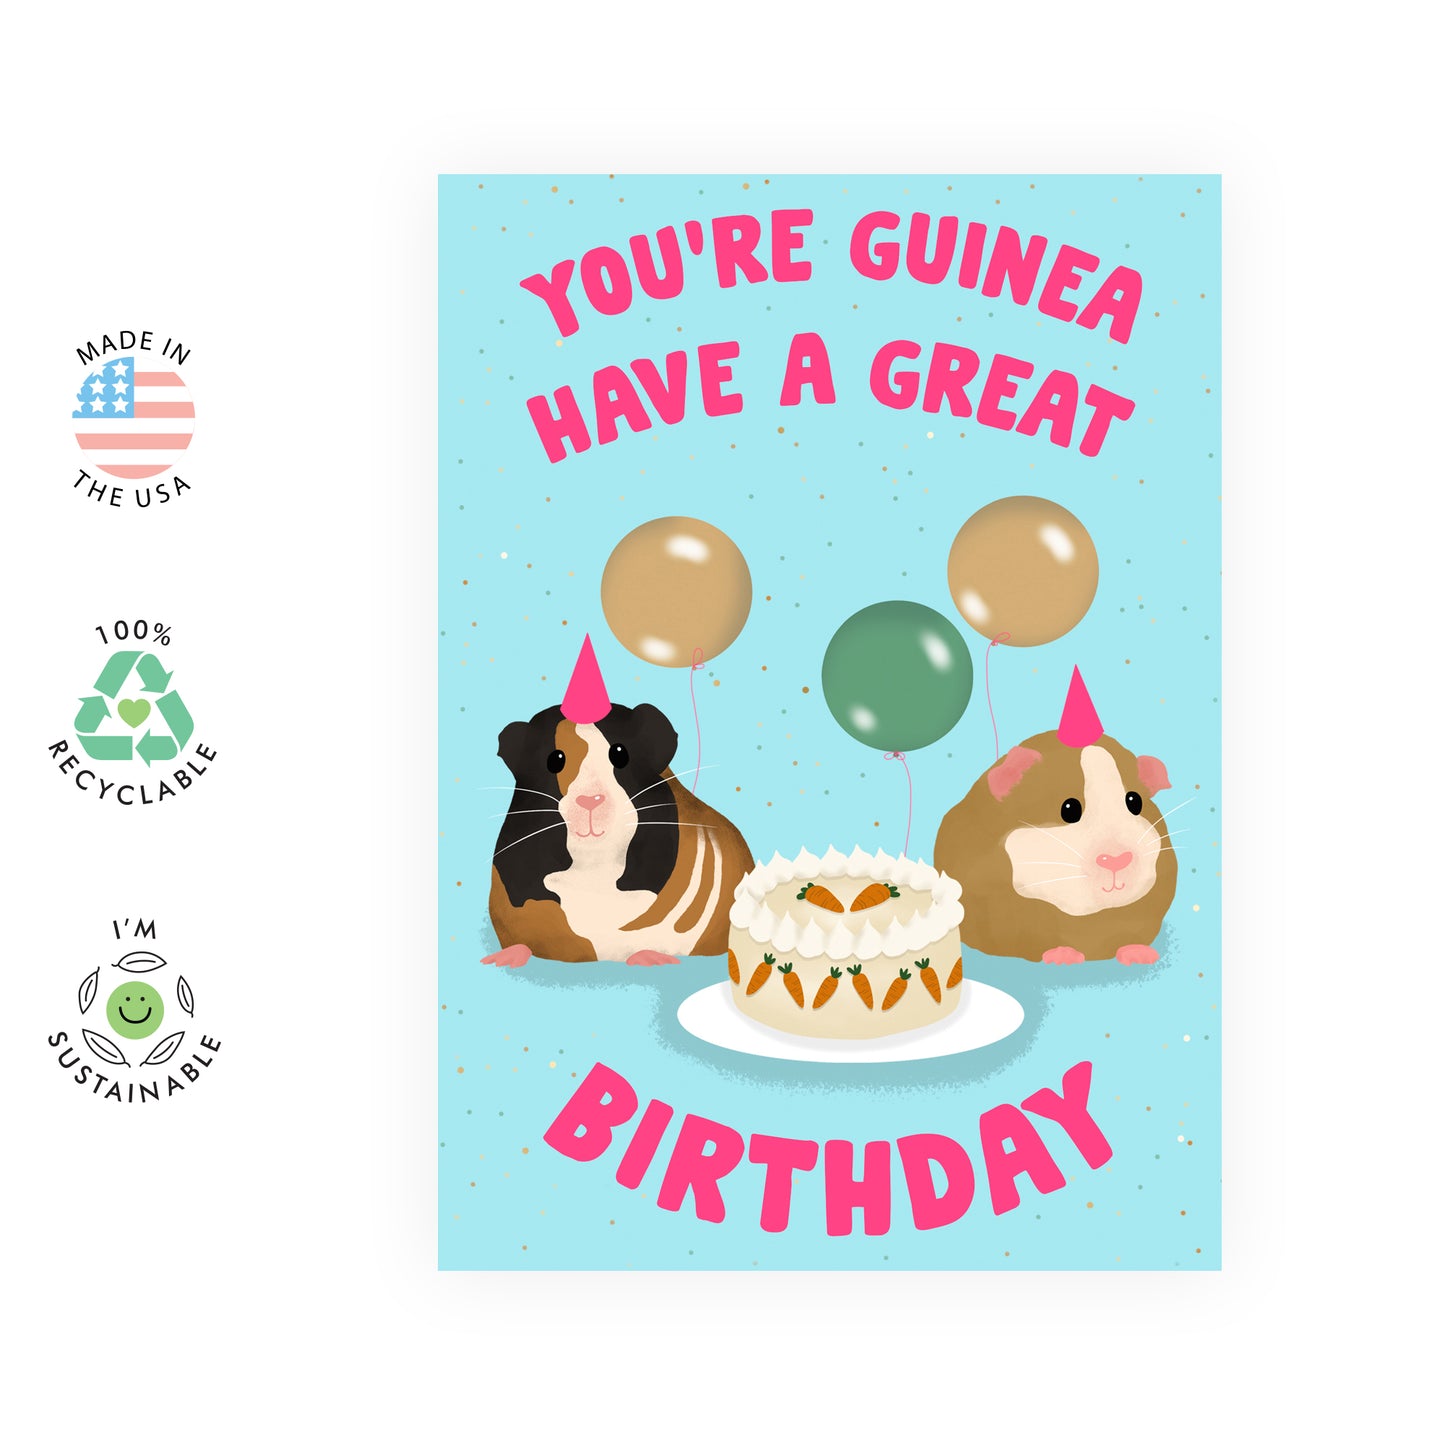 Cute Birthday Card - Guinea Have a Great Birthday - For Men Women Him Her Boys Girls